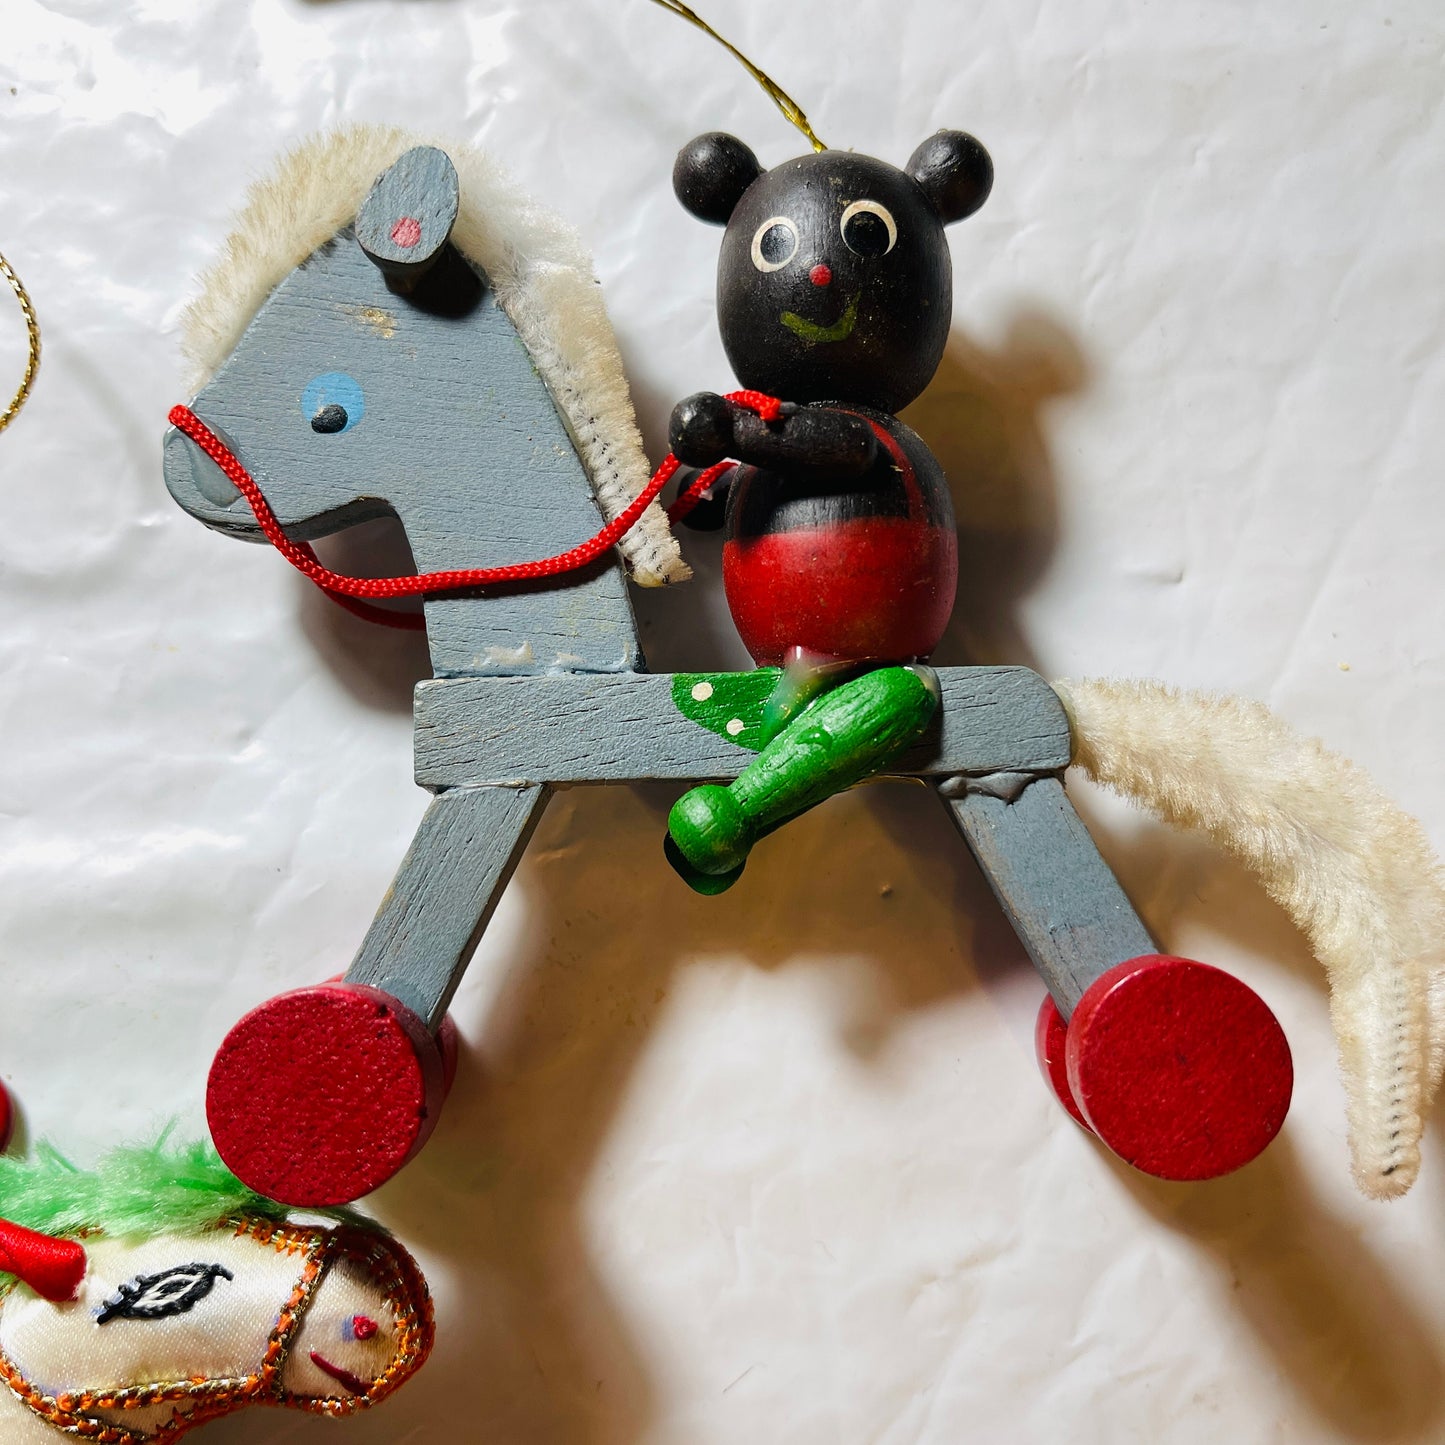 Rocking Horse, Set of 4, Wood, Metal and Fabric, Ornaments